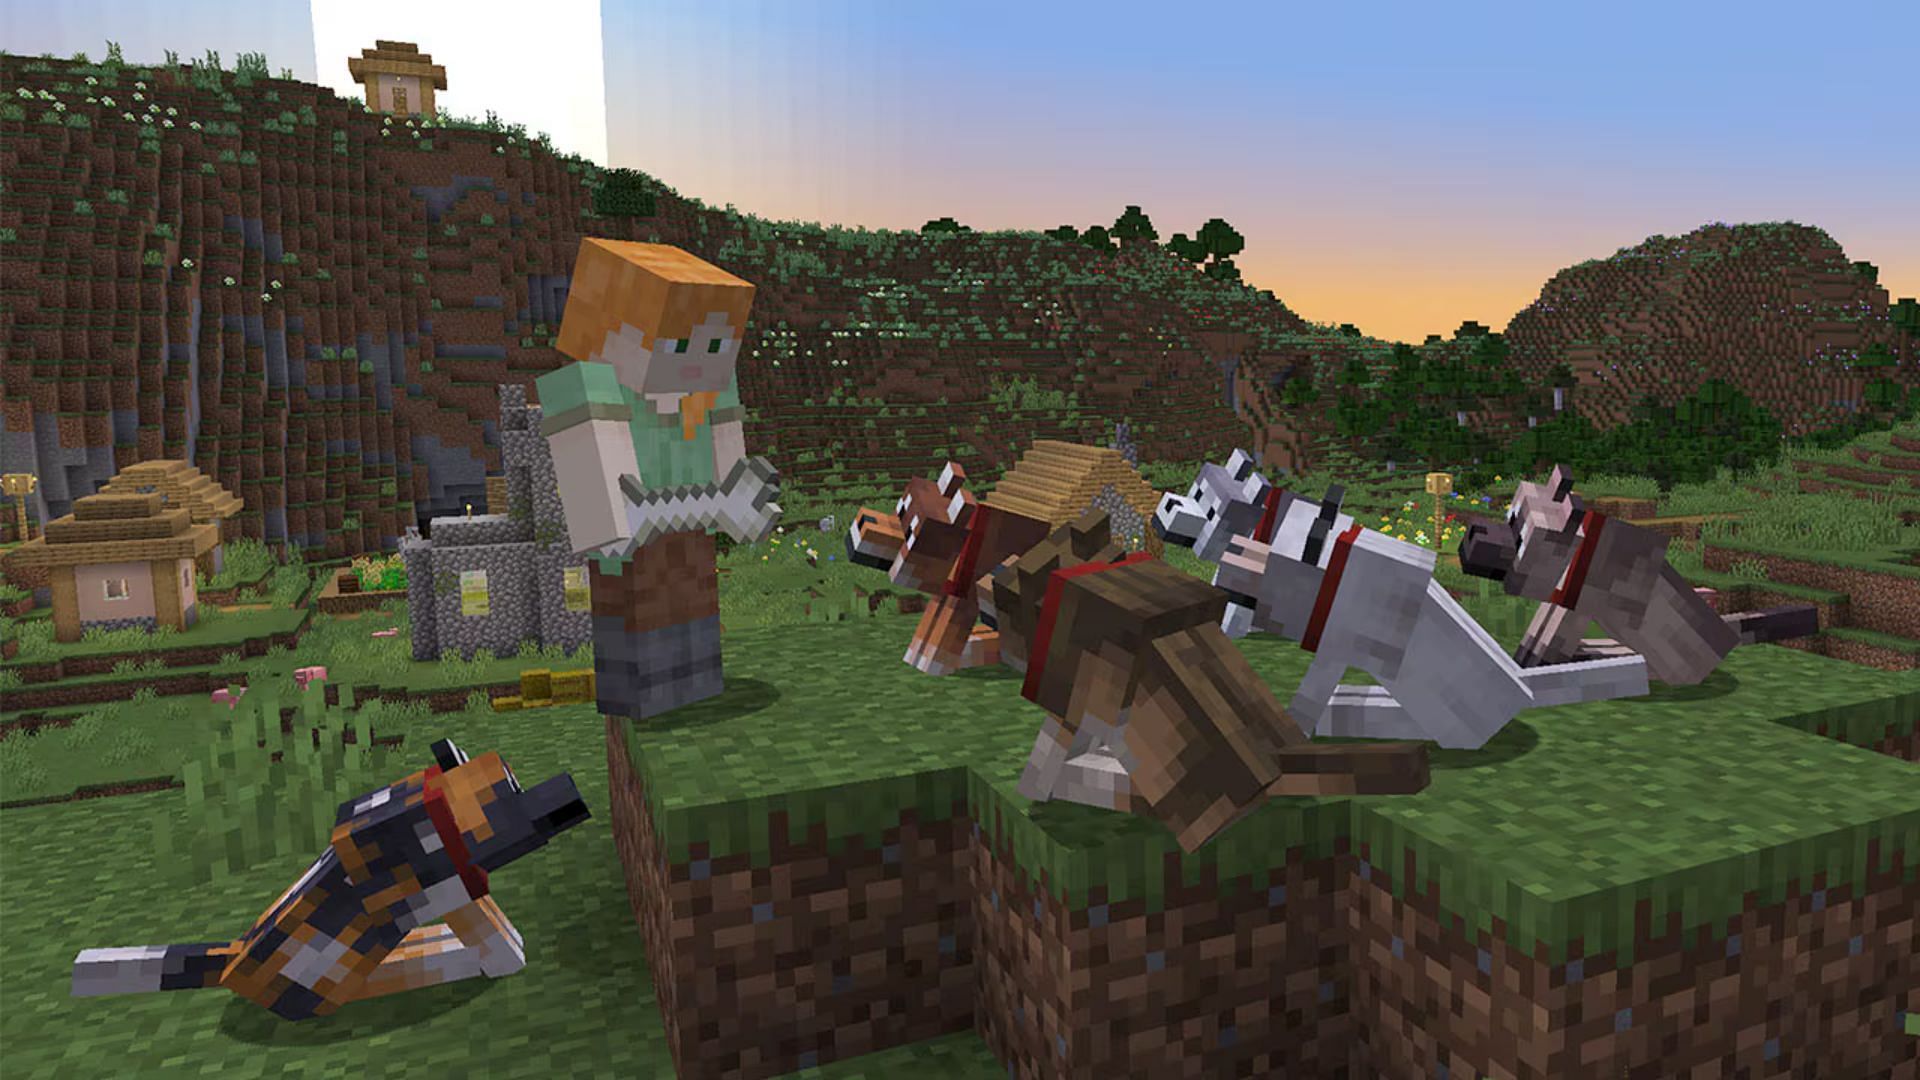 New wolves have been added to the game (Image via Mojang Studios)